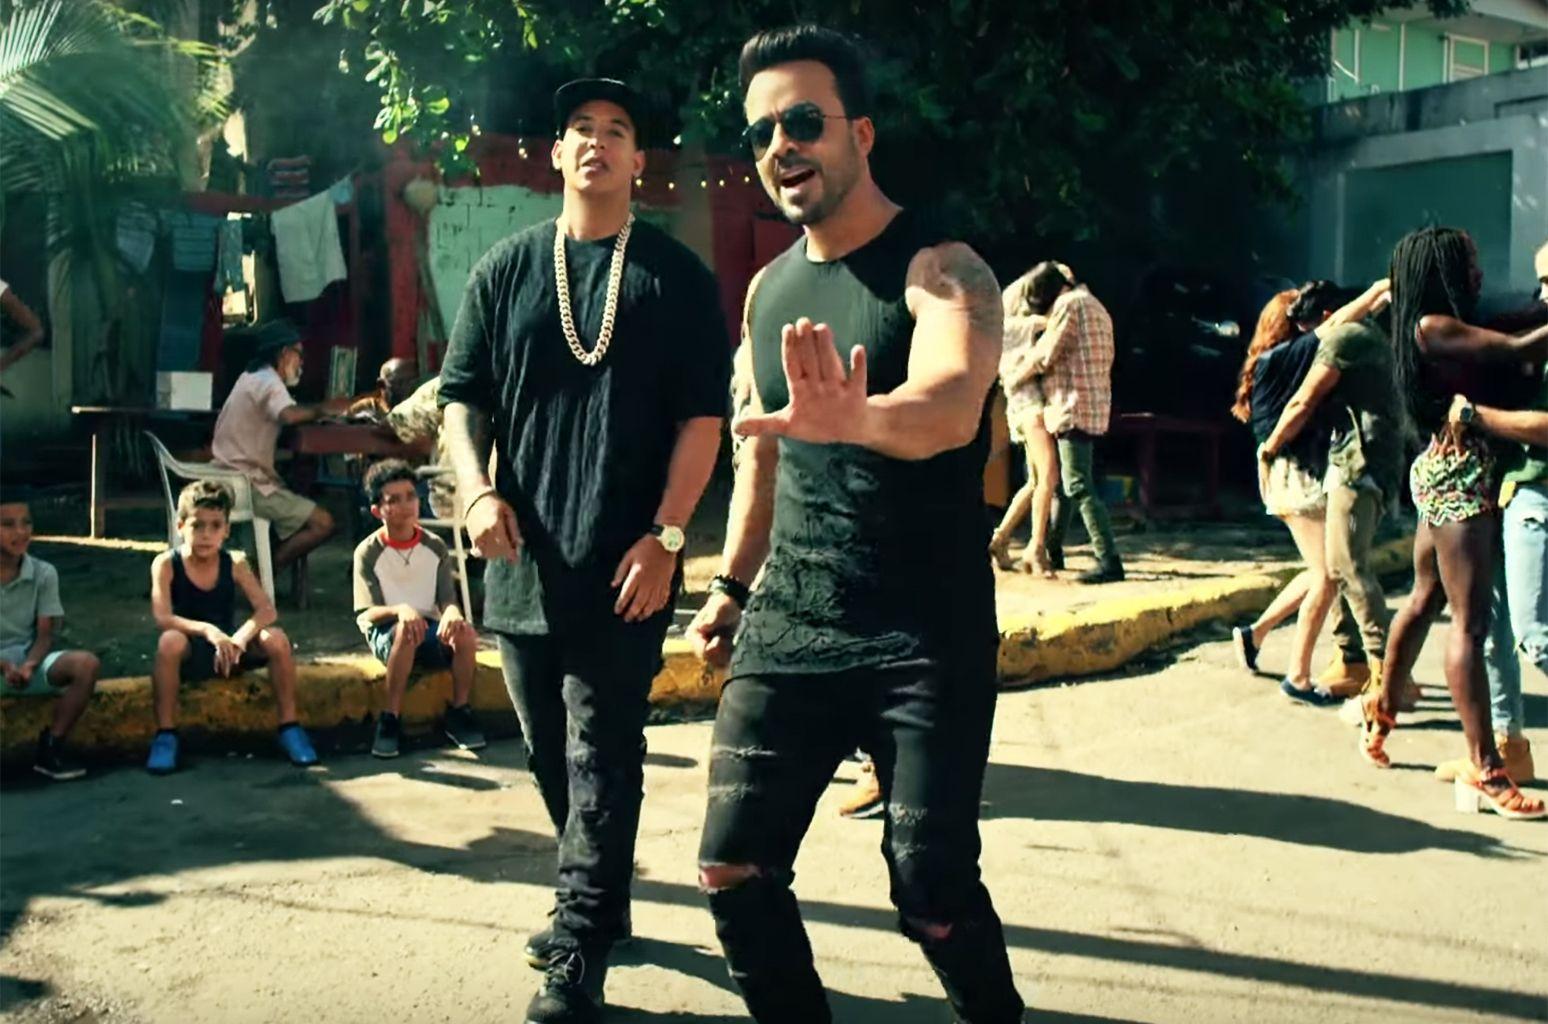 Luis Fonsi & Daddy Yankee's 'Despacito' Tops Hot 100 for Fifth